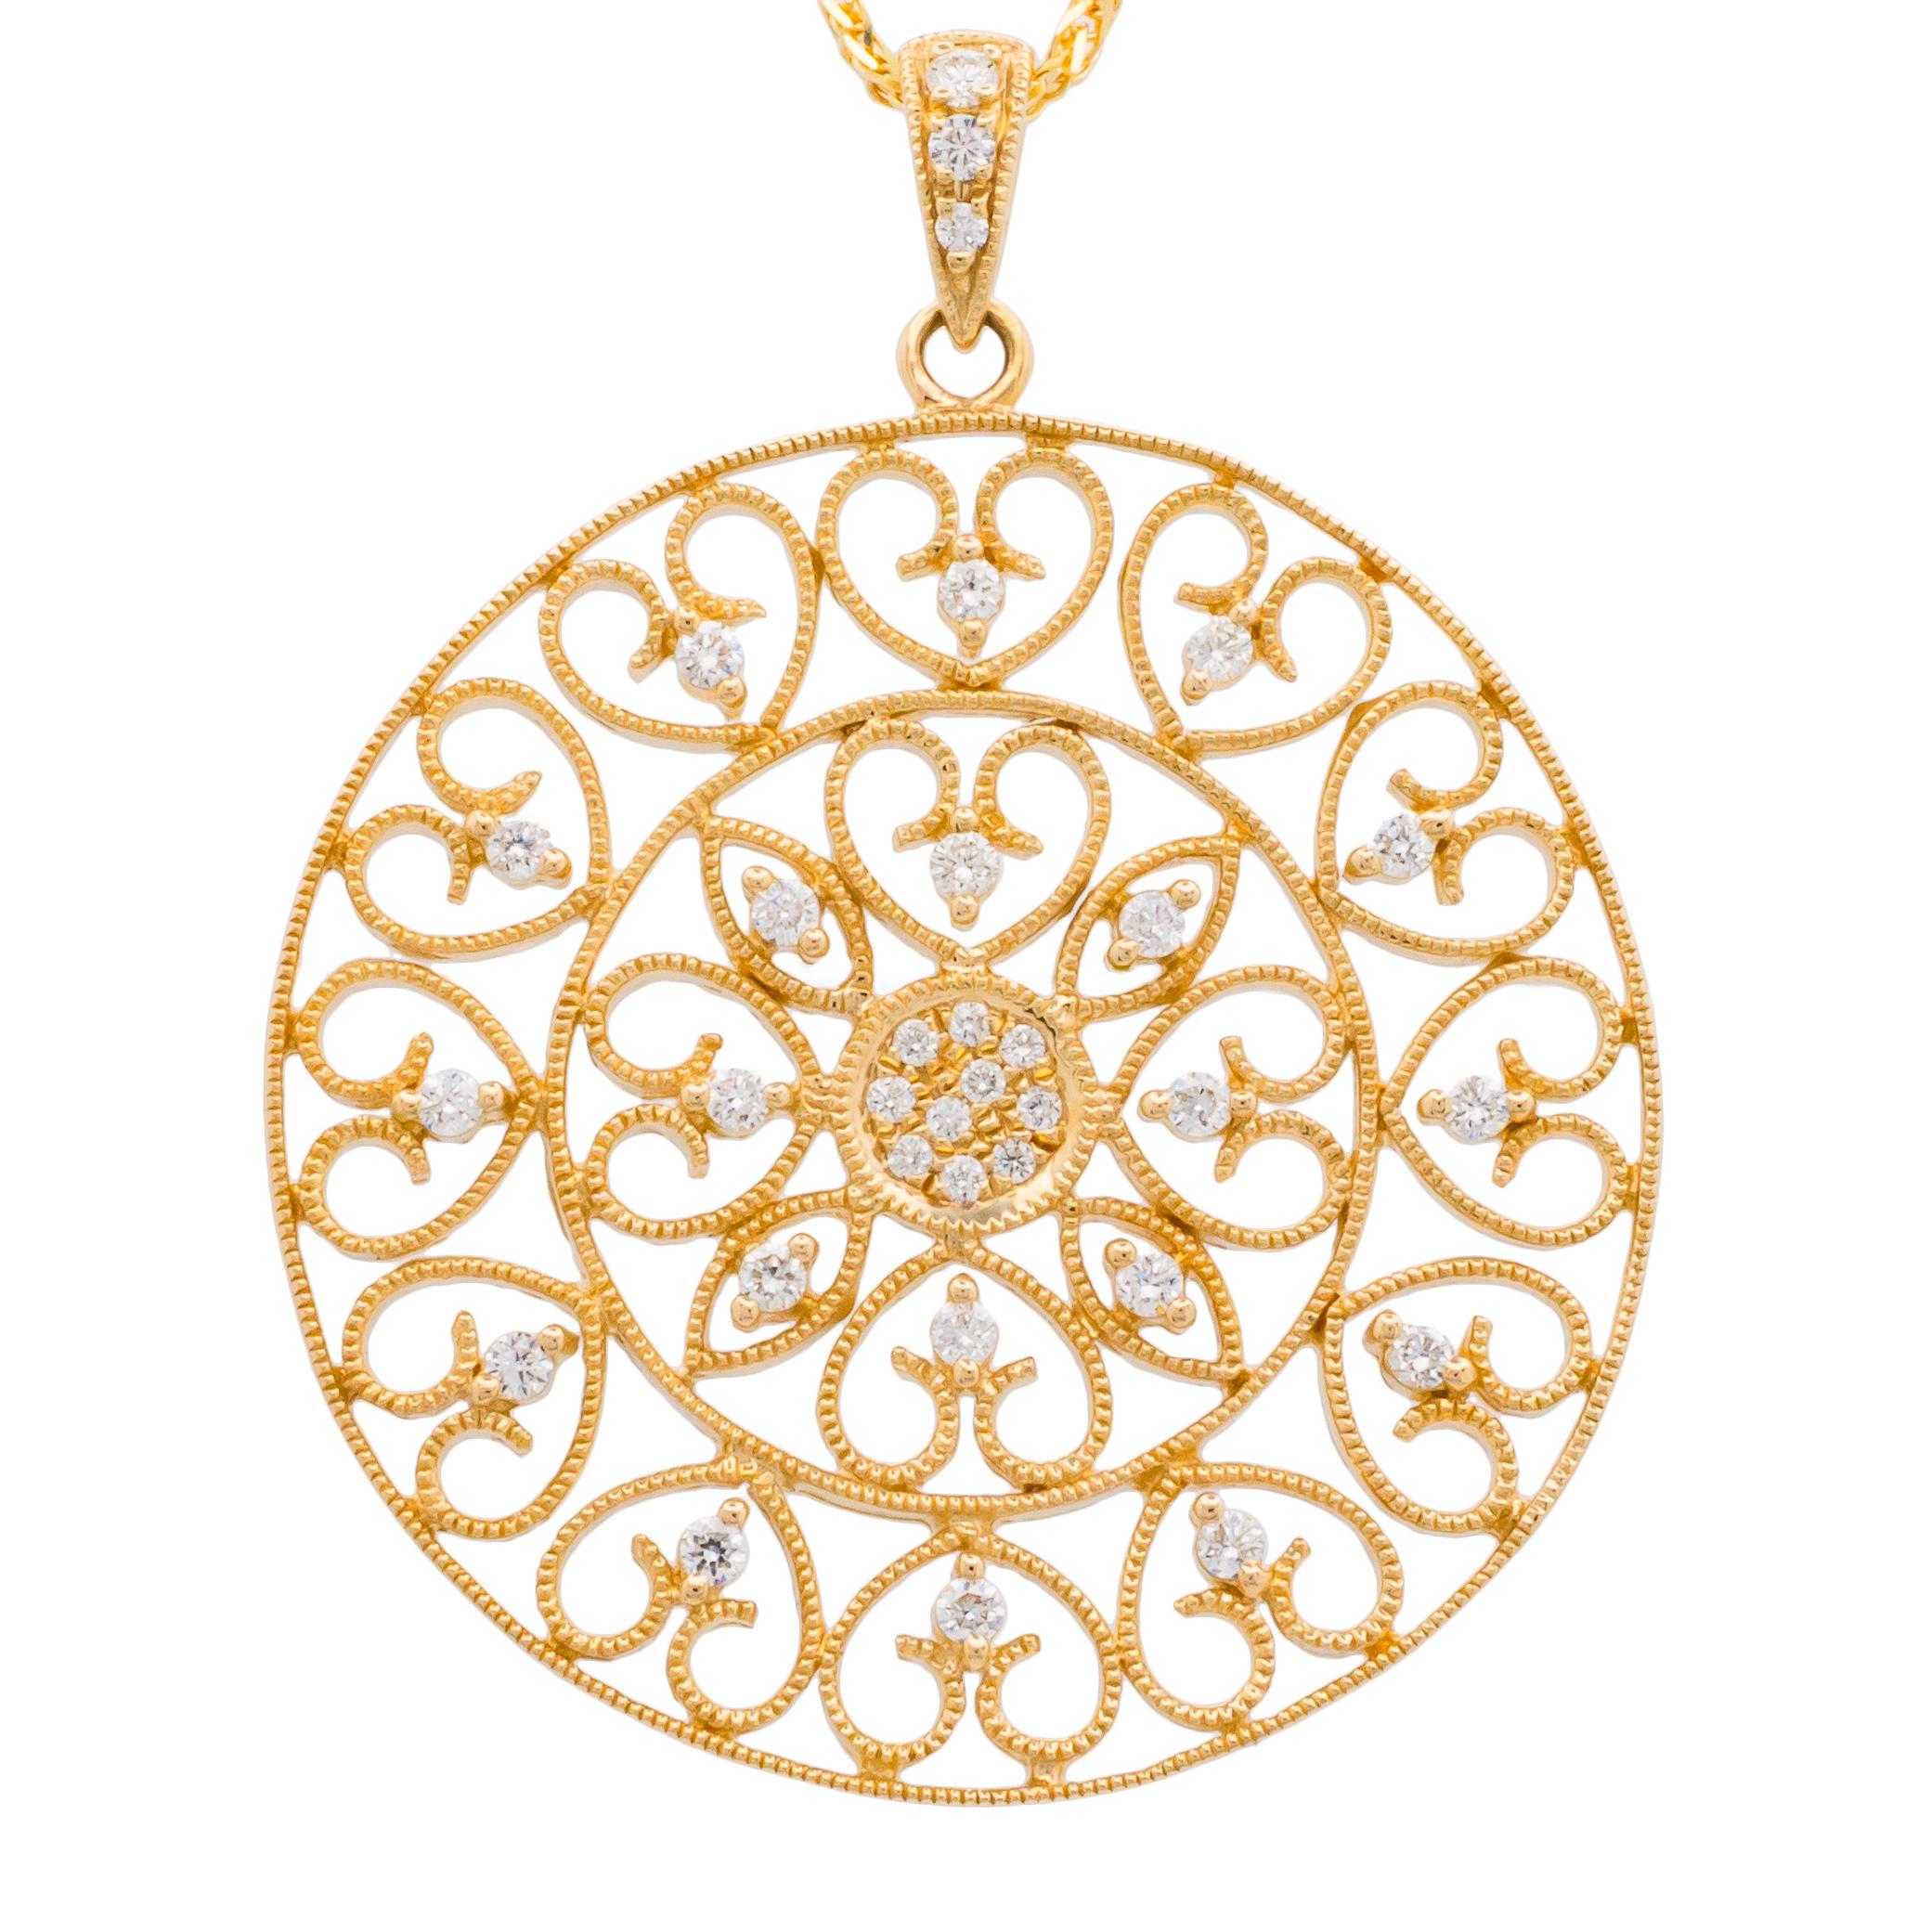 Crafted with exquisite attention to detail, this pendant necklace features 32 round brilliant cut diamonds, set in a 14k yellow gold wire filigree frame. The warmth of the yellow gold setting complements the brilliance of the diamonds. The diamonds